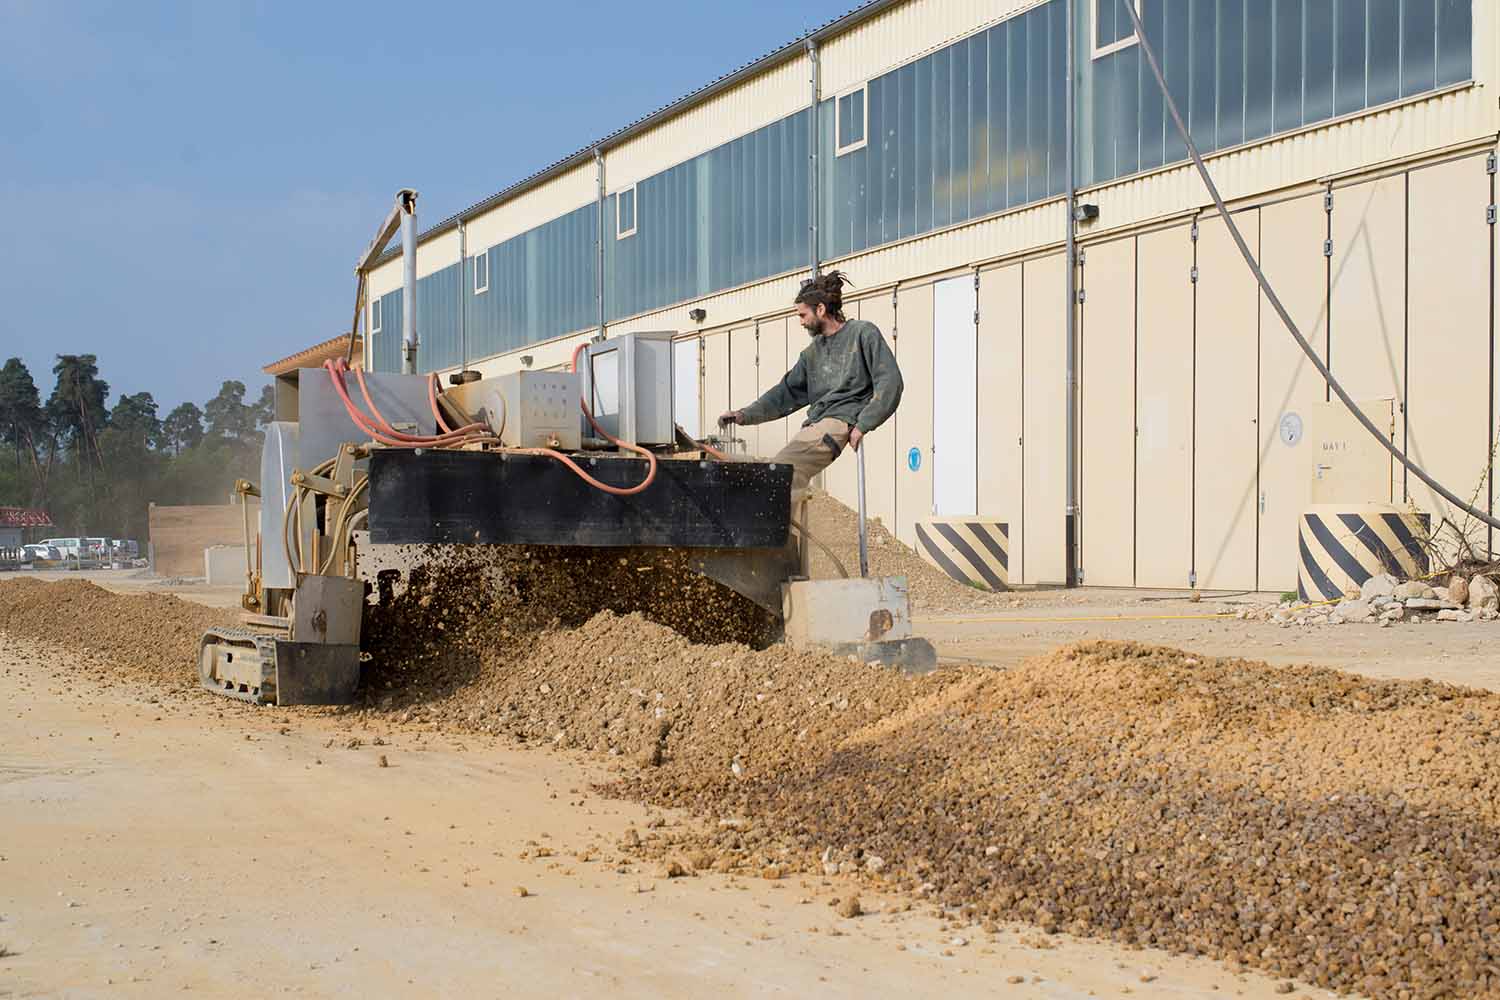 Machine mixing rammed earth aggregate prior to fabrication